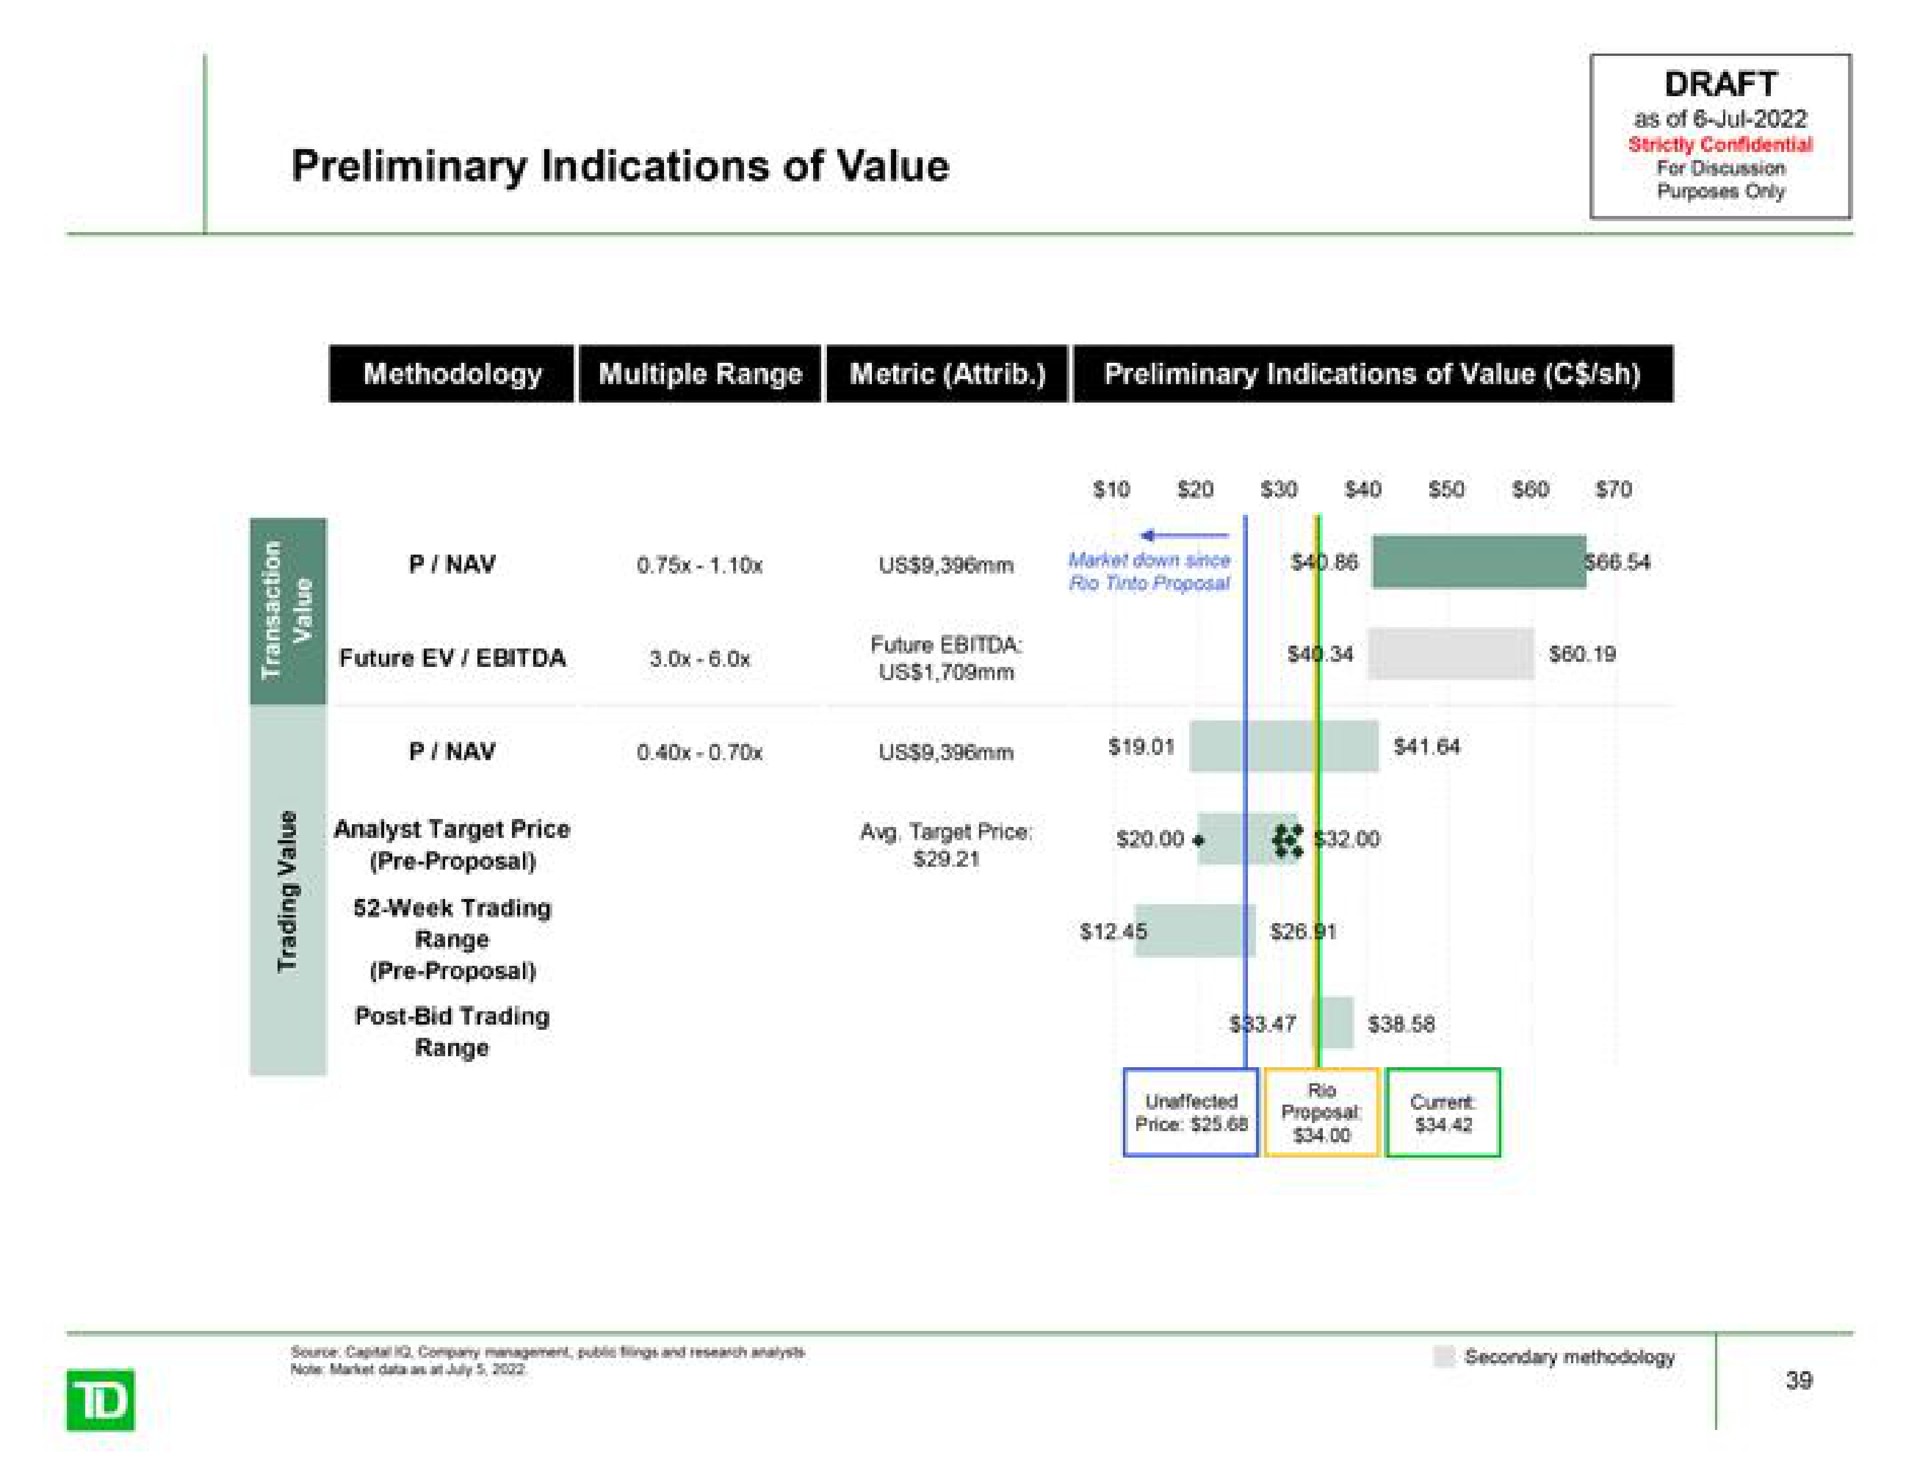 preliminary indications of value proposal and secondary | TD Securities